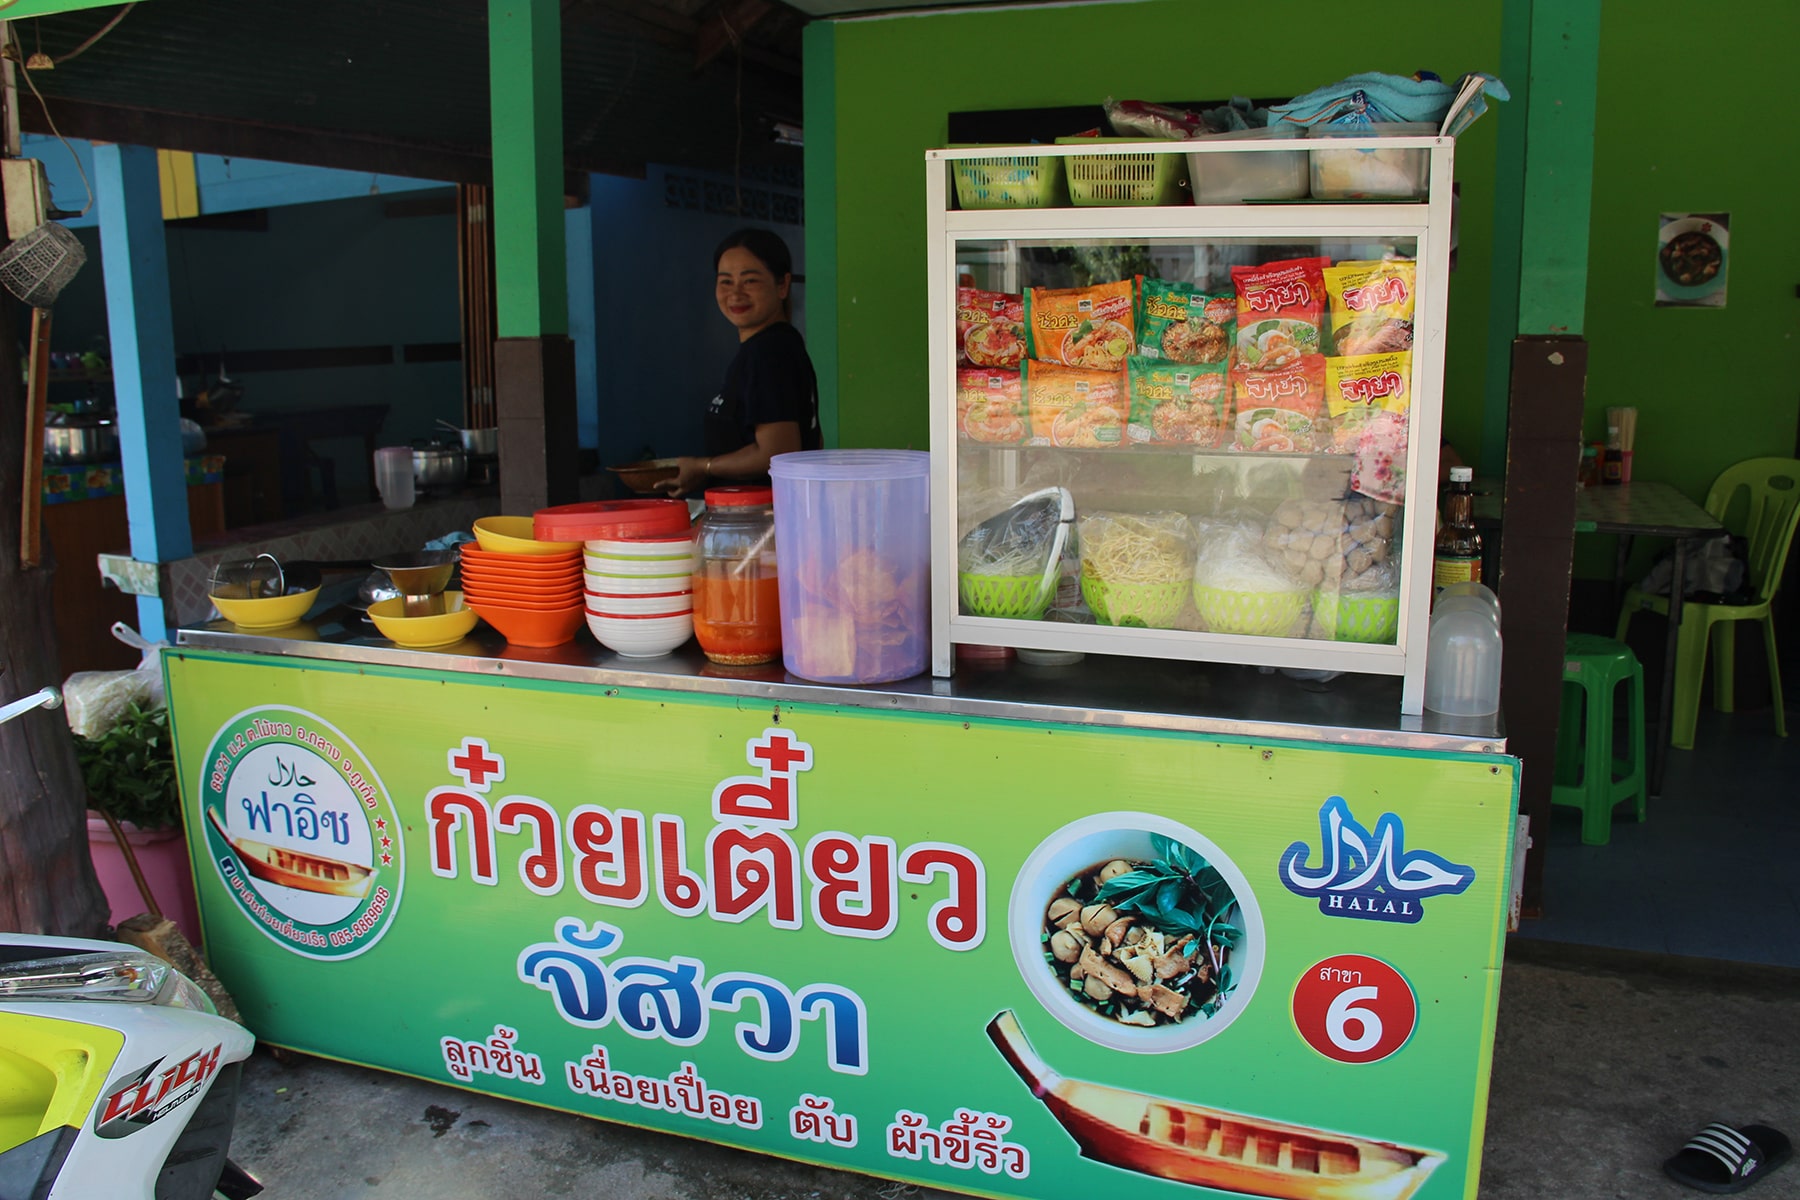 Noodle restaurant in Koh Yao Yai with a green sign